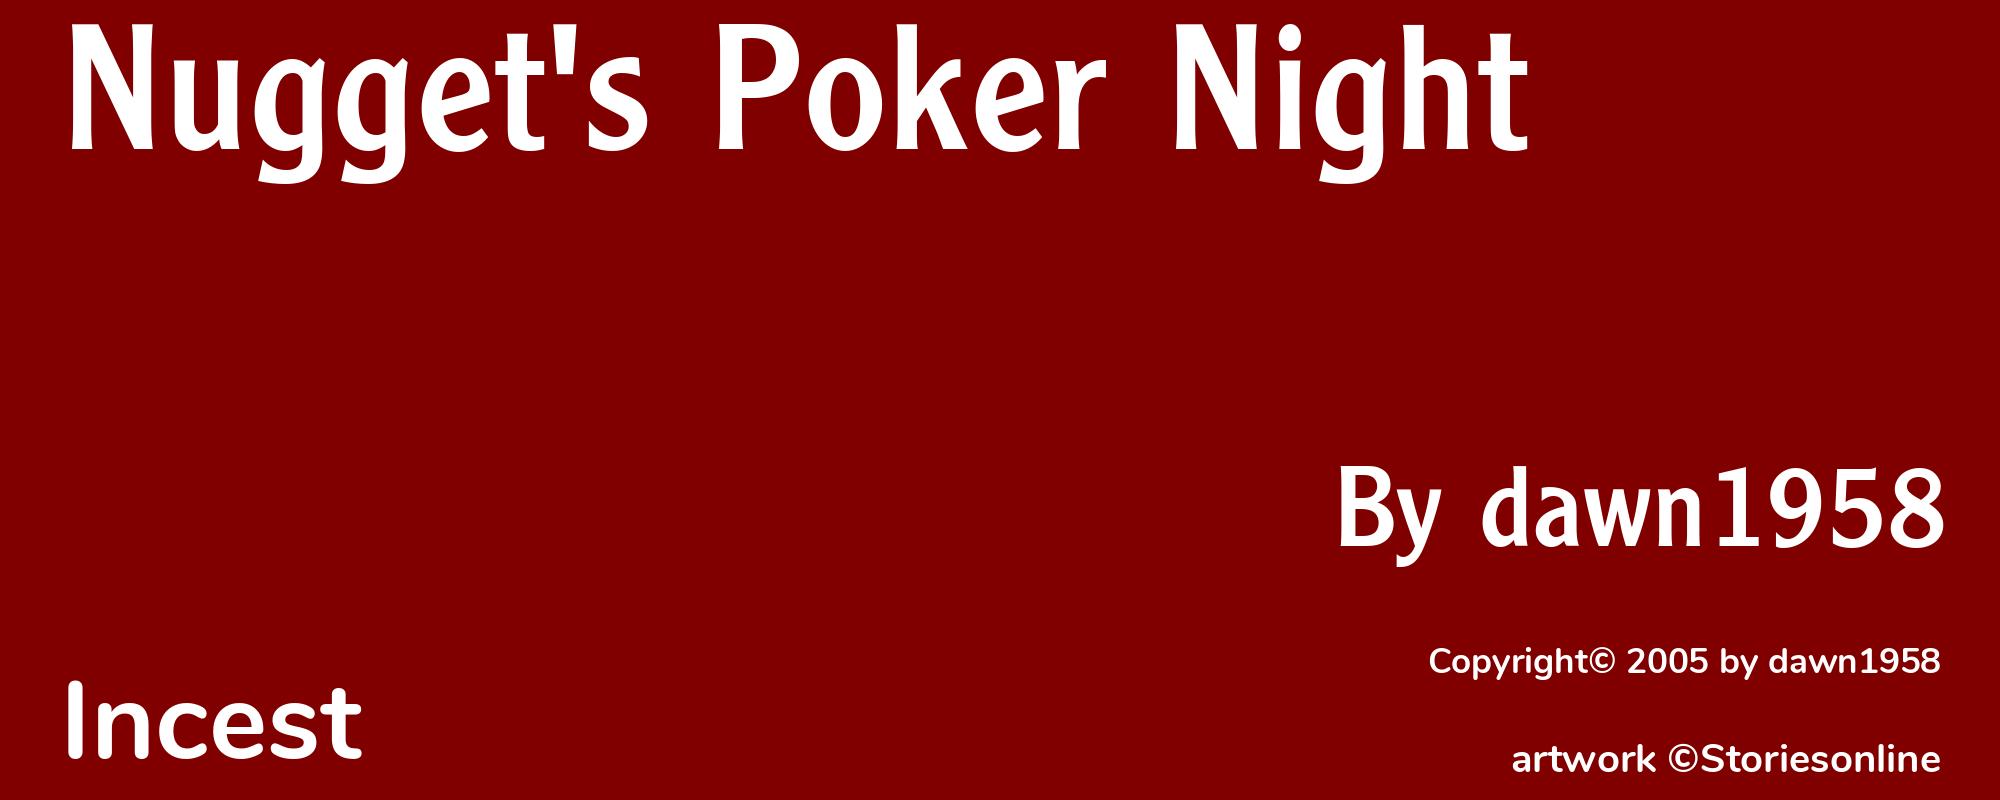 Nugget's Poker Night - Cover